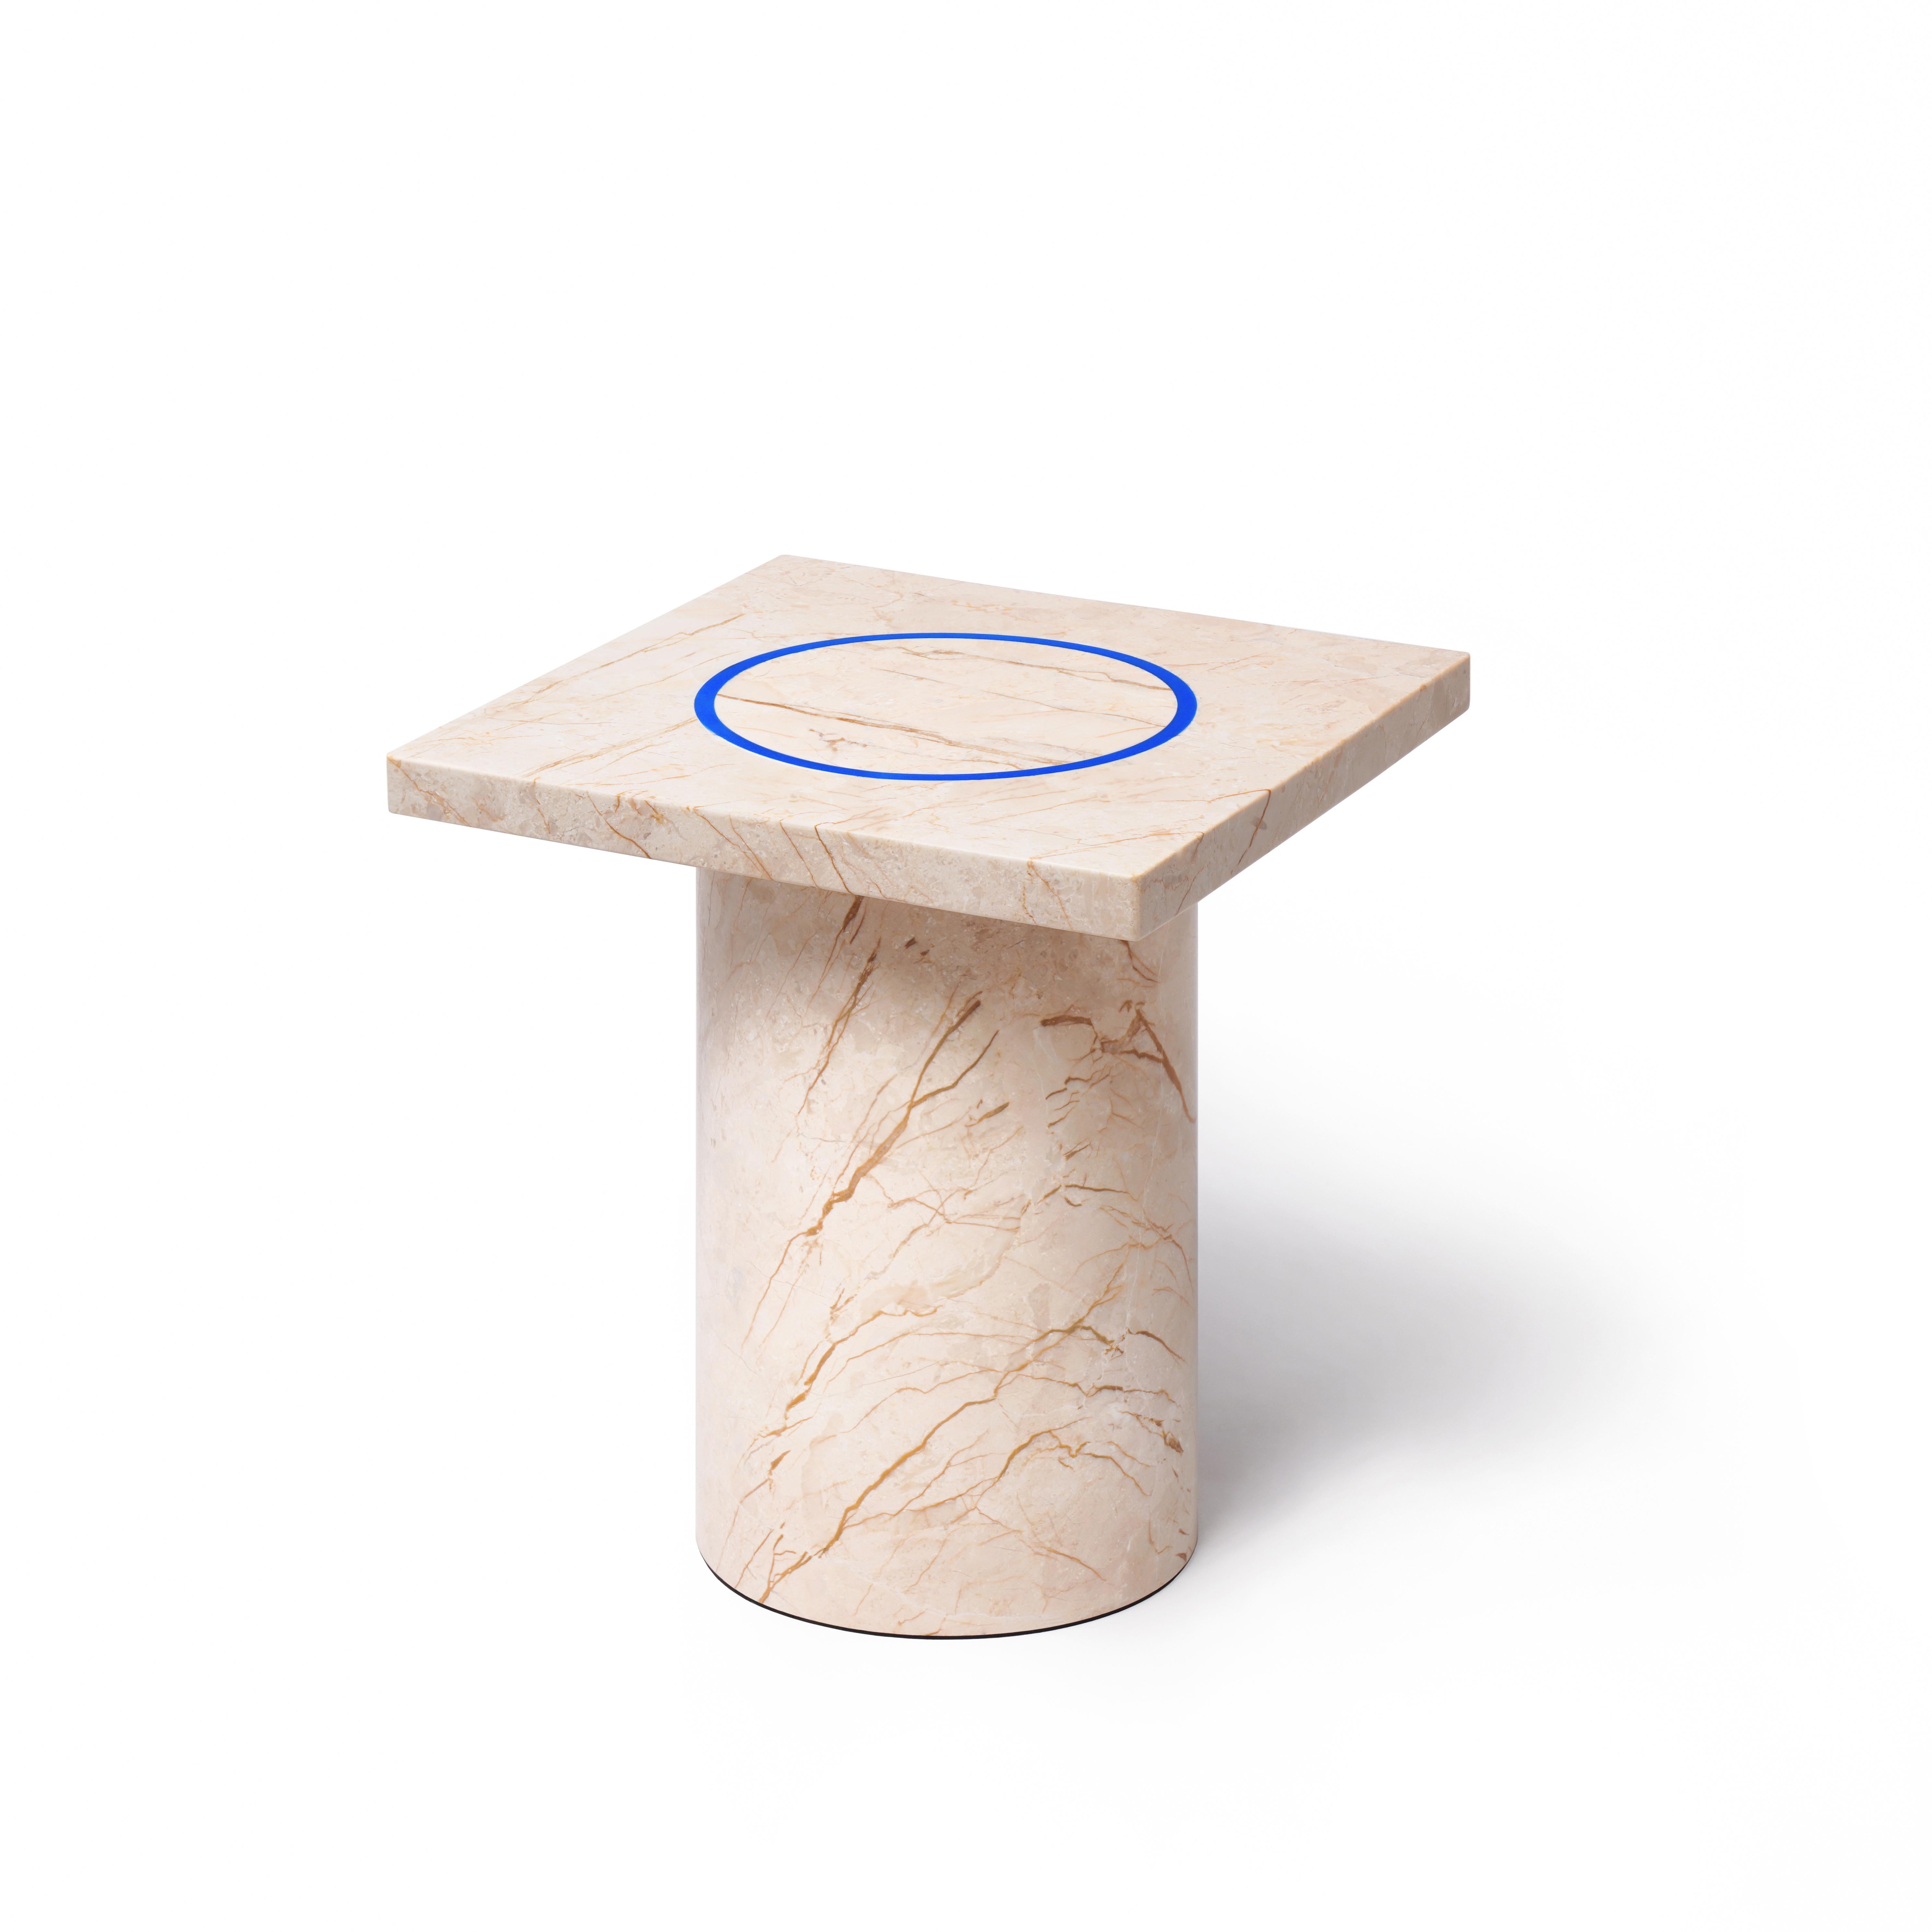 BUZAO released the 2020 new collection, DISLOCATION, which consisted of a round marble coffee table and two marble side tables. The usage of blue industrial materials dislocates the marble’s natural texture. The collection comes in Menes Gold and